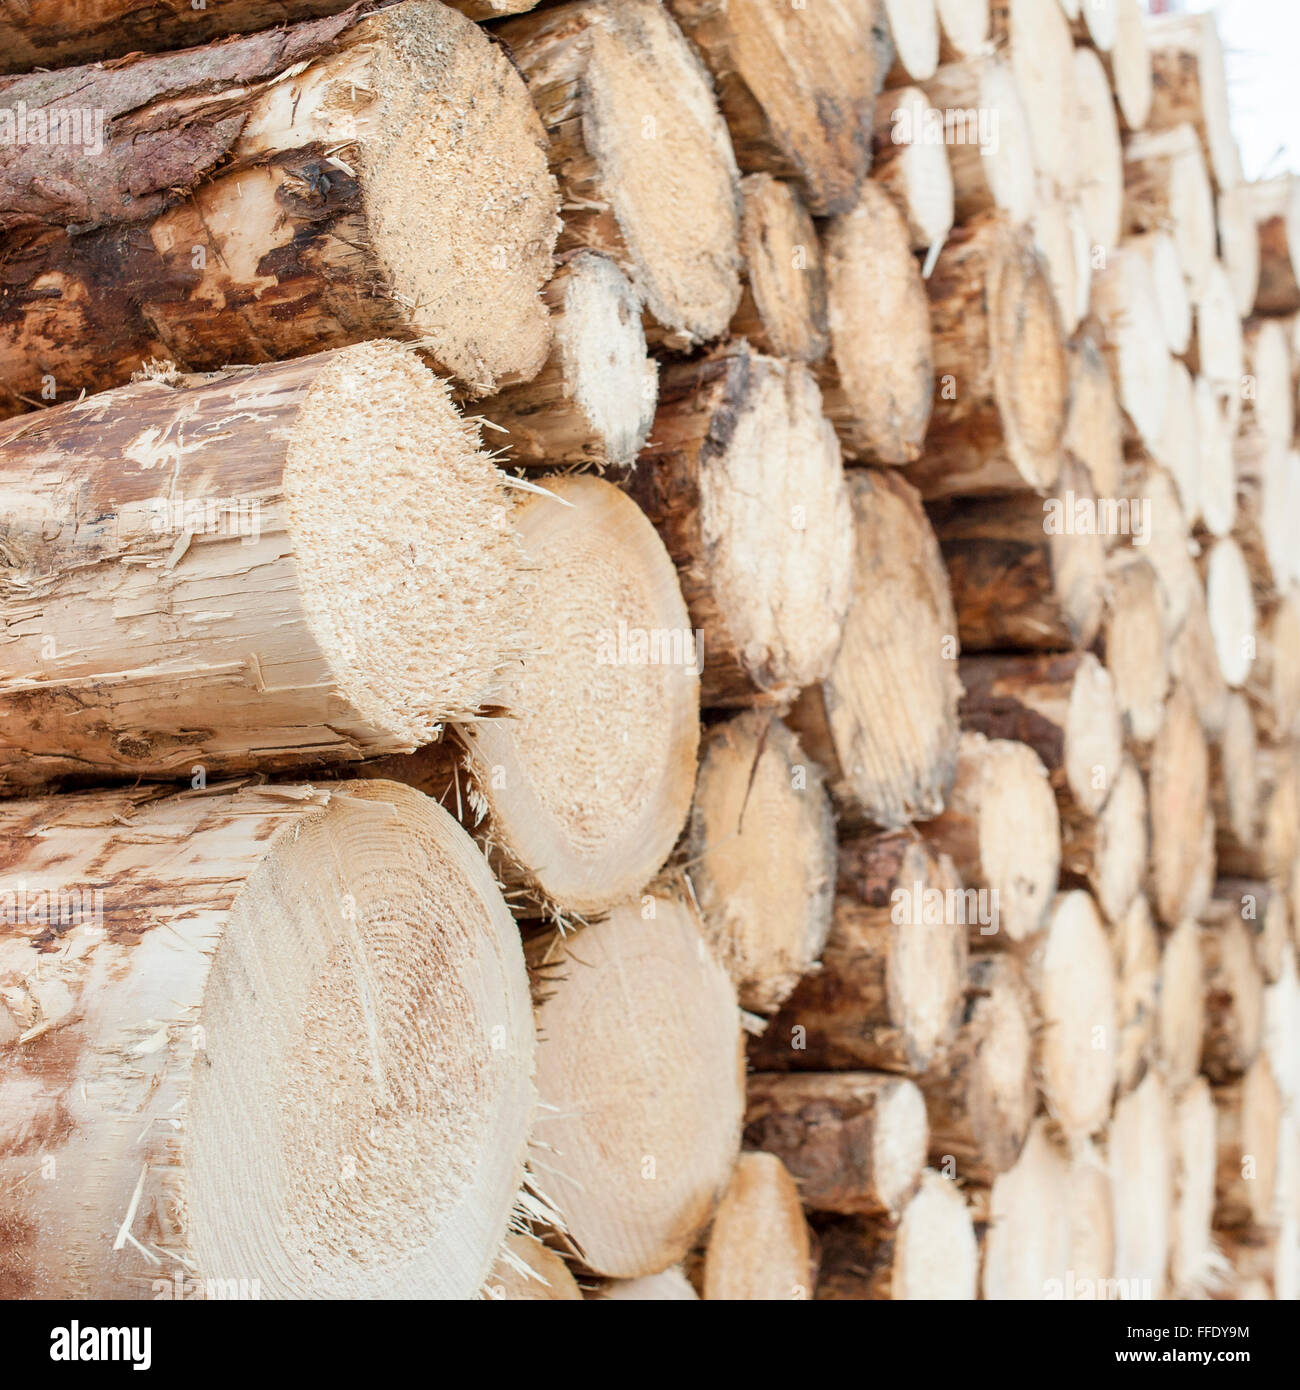 A pile of logs stacked pine logs. Stock Photo